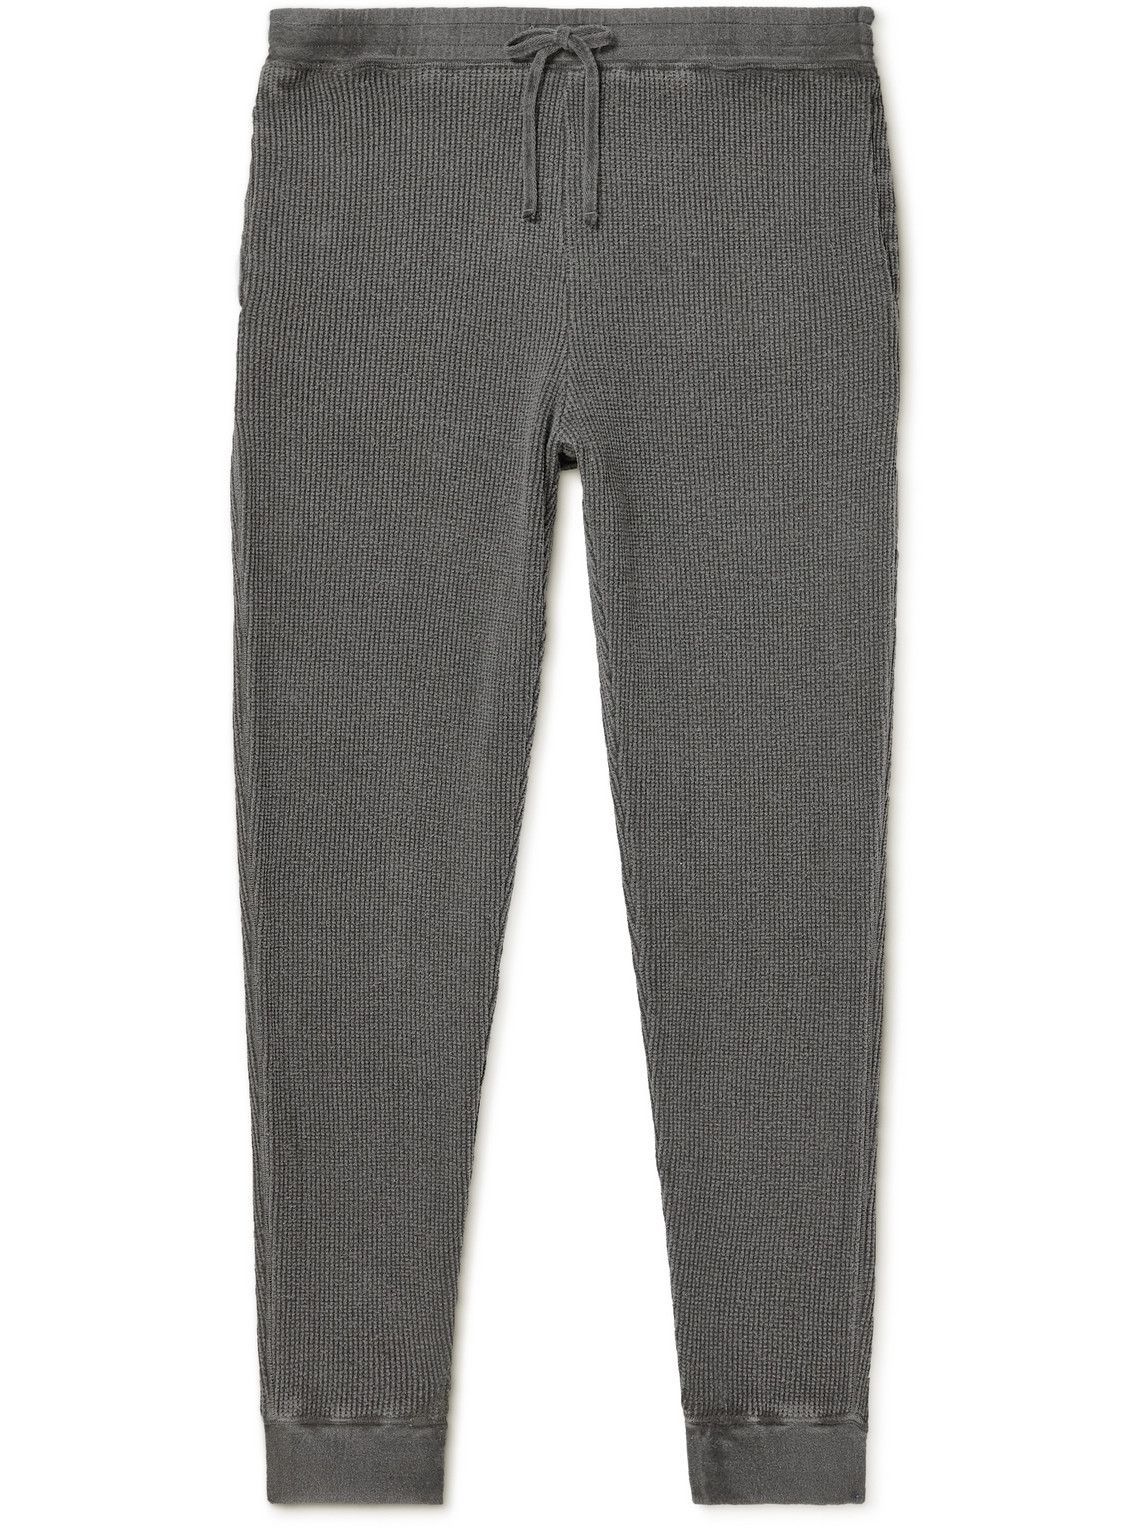 Photo: COTTLE - Noel Slim-Fit Tapered Organic Cotton and Silk-Blend Drawstring Sweatpants - Gray